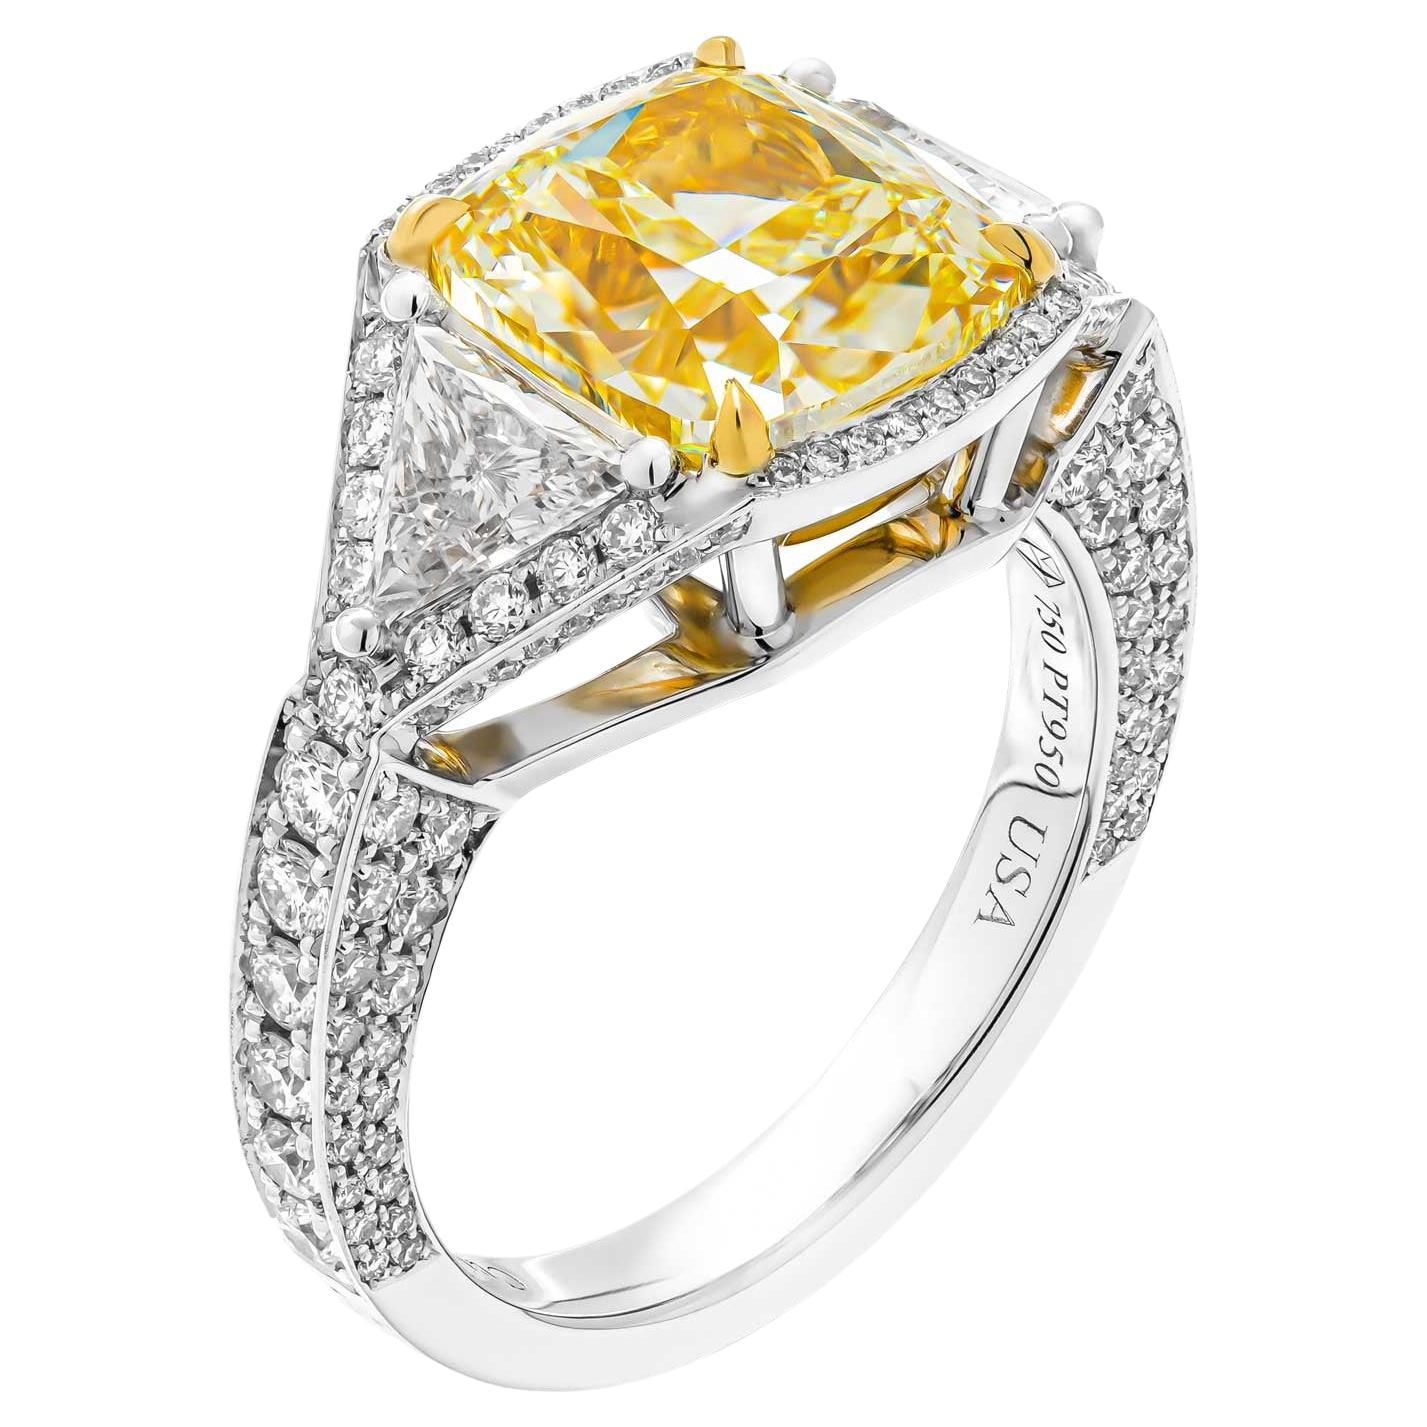 GIA Certified 3-Stone Ring with 4.01 Carat Fancy Light Yellow Diamond For Sale